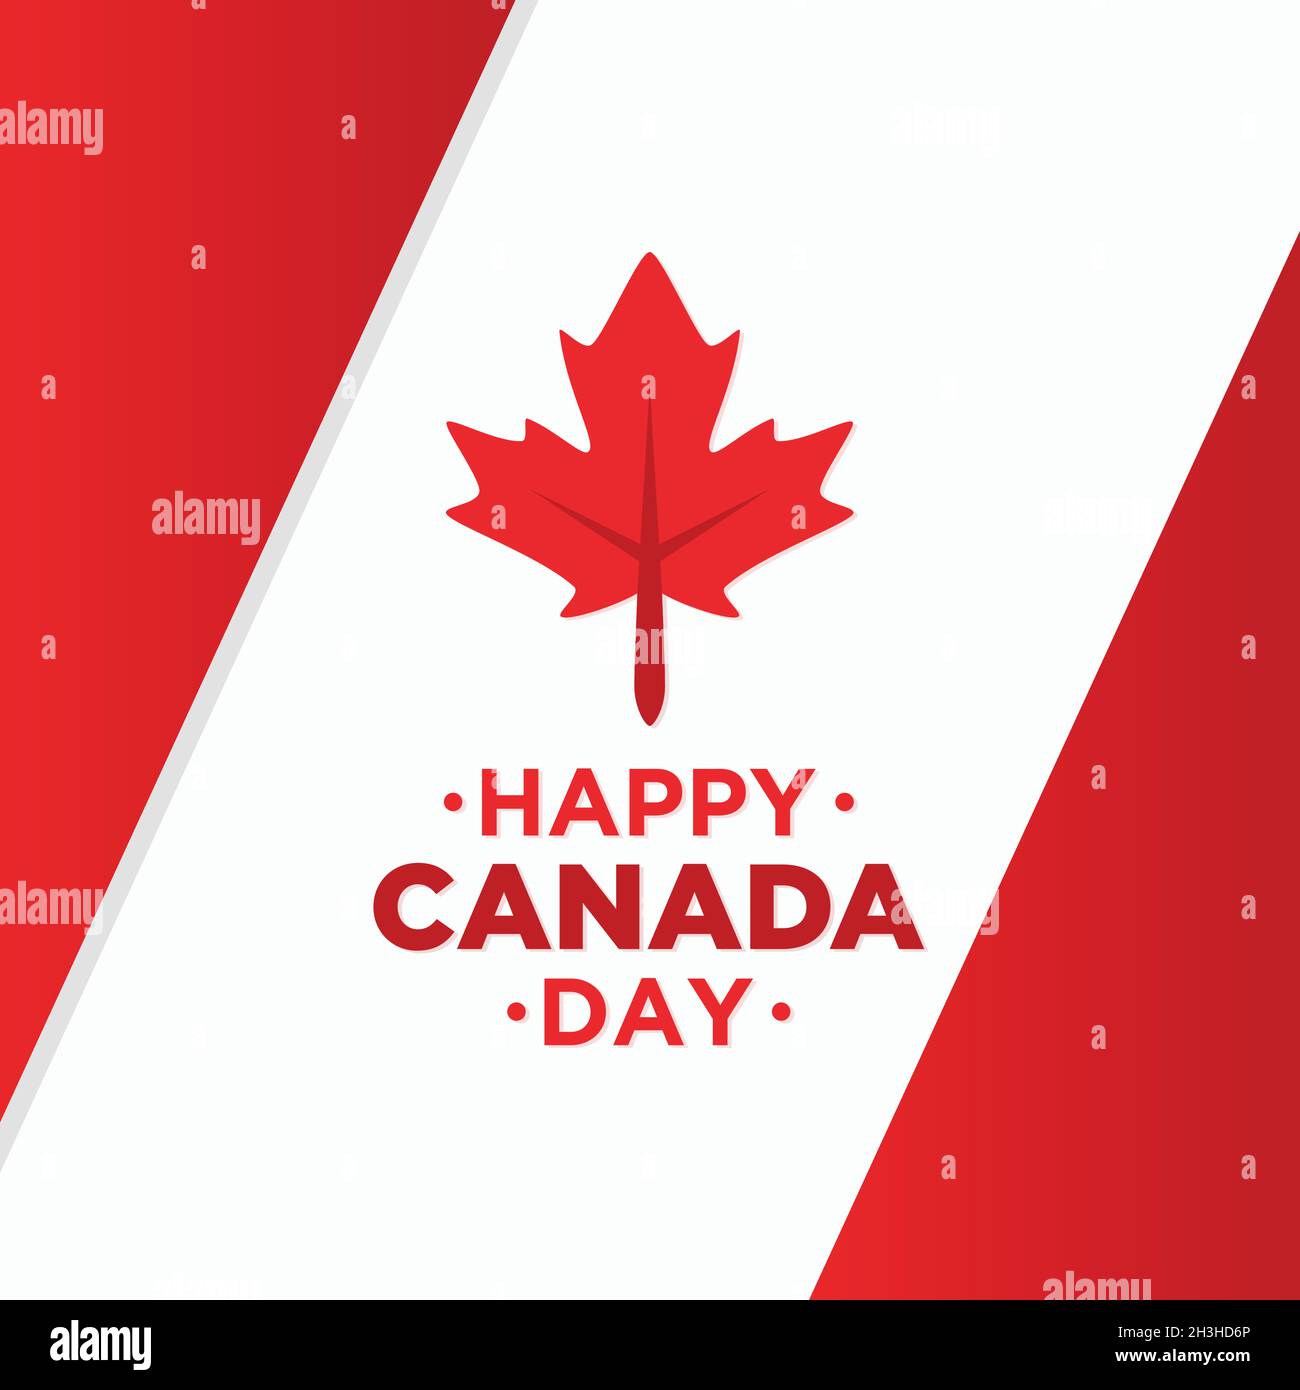 Happy Canada day background with red maple leaf vector image. Vector illustration EPS.8 EPS.10 Stock Vector